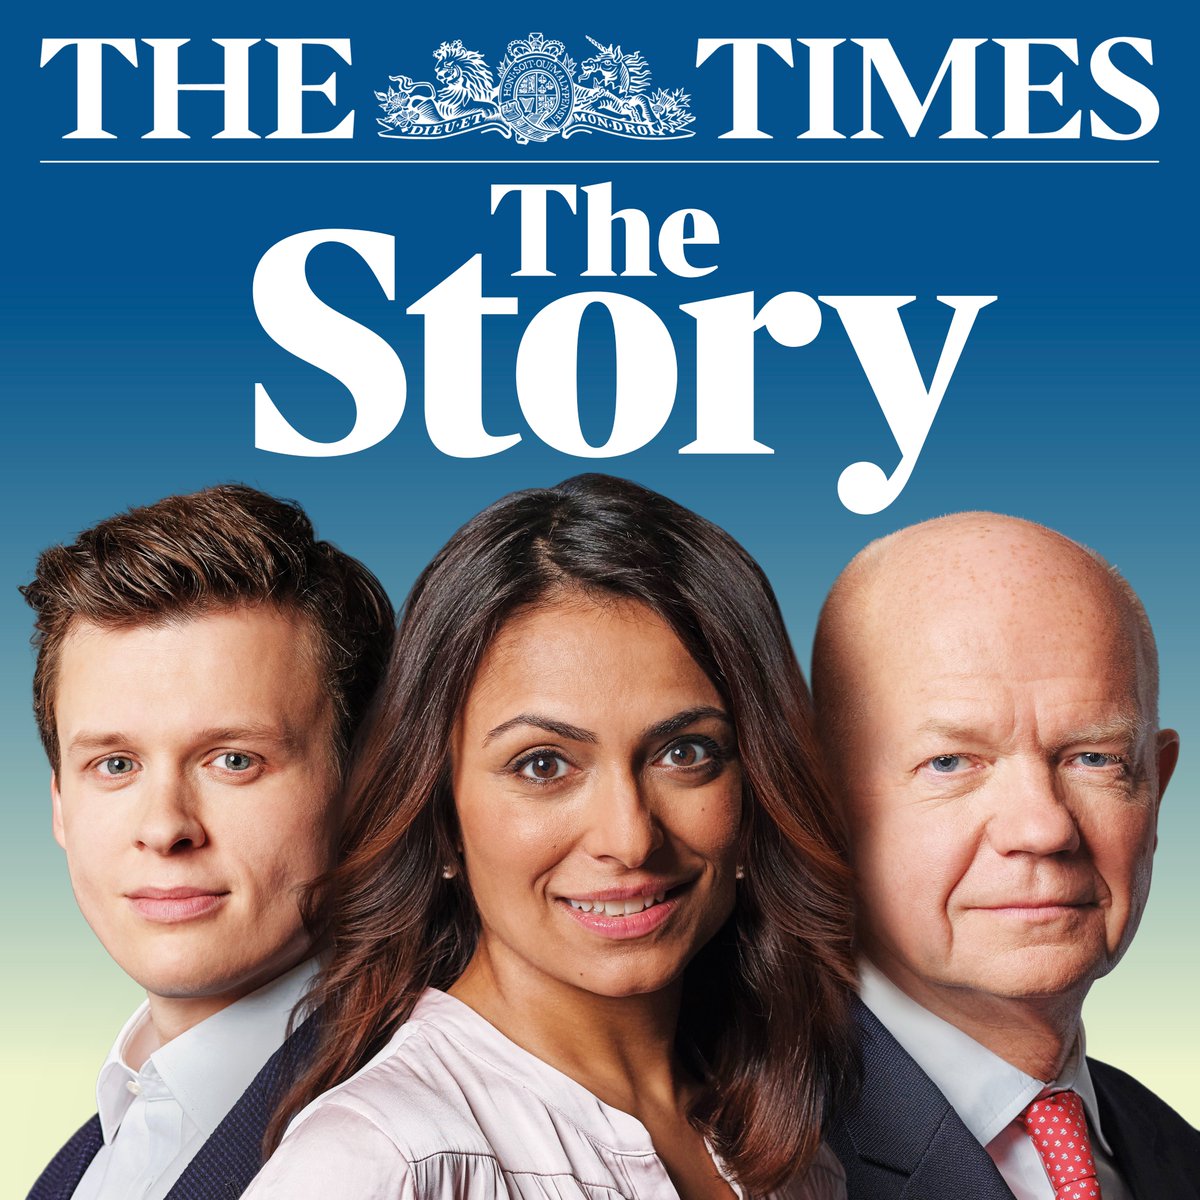 .@thetimes are refreshing their flagship daily news podcast. From Tuesday 19th March, Stories of our times becomes The Story. Former Conservative leader Lord Hague is joining the presenter line-up, alongside Manveen Rana and new host Luke Jones. Read more: news.co.uk/latest-news/st…